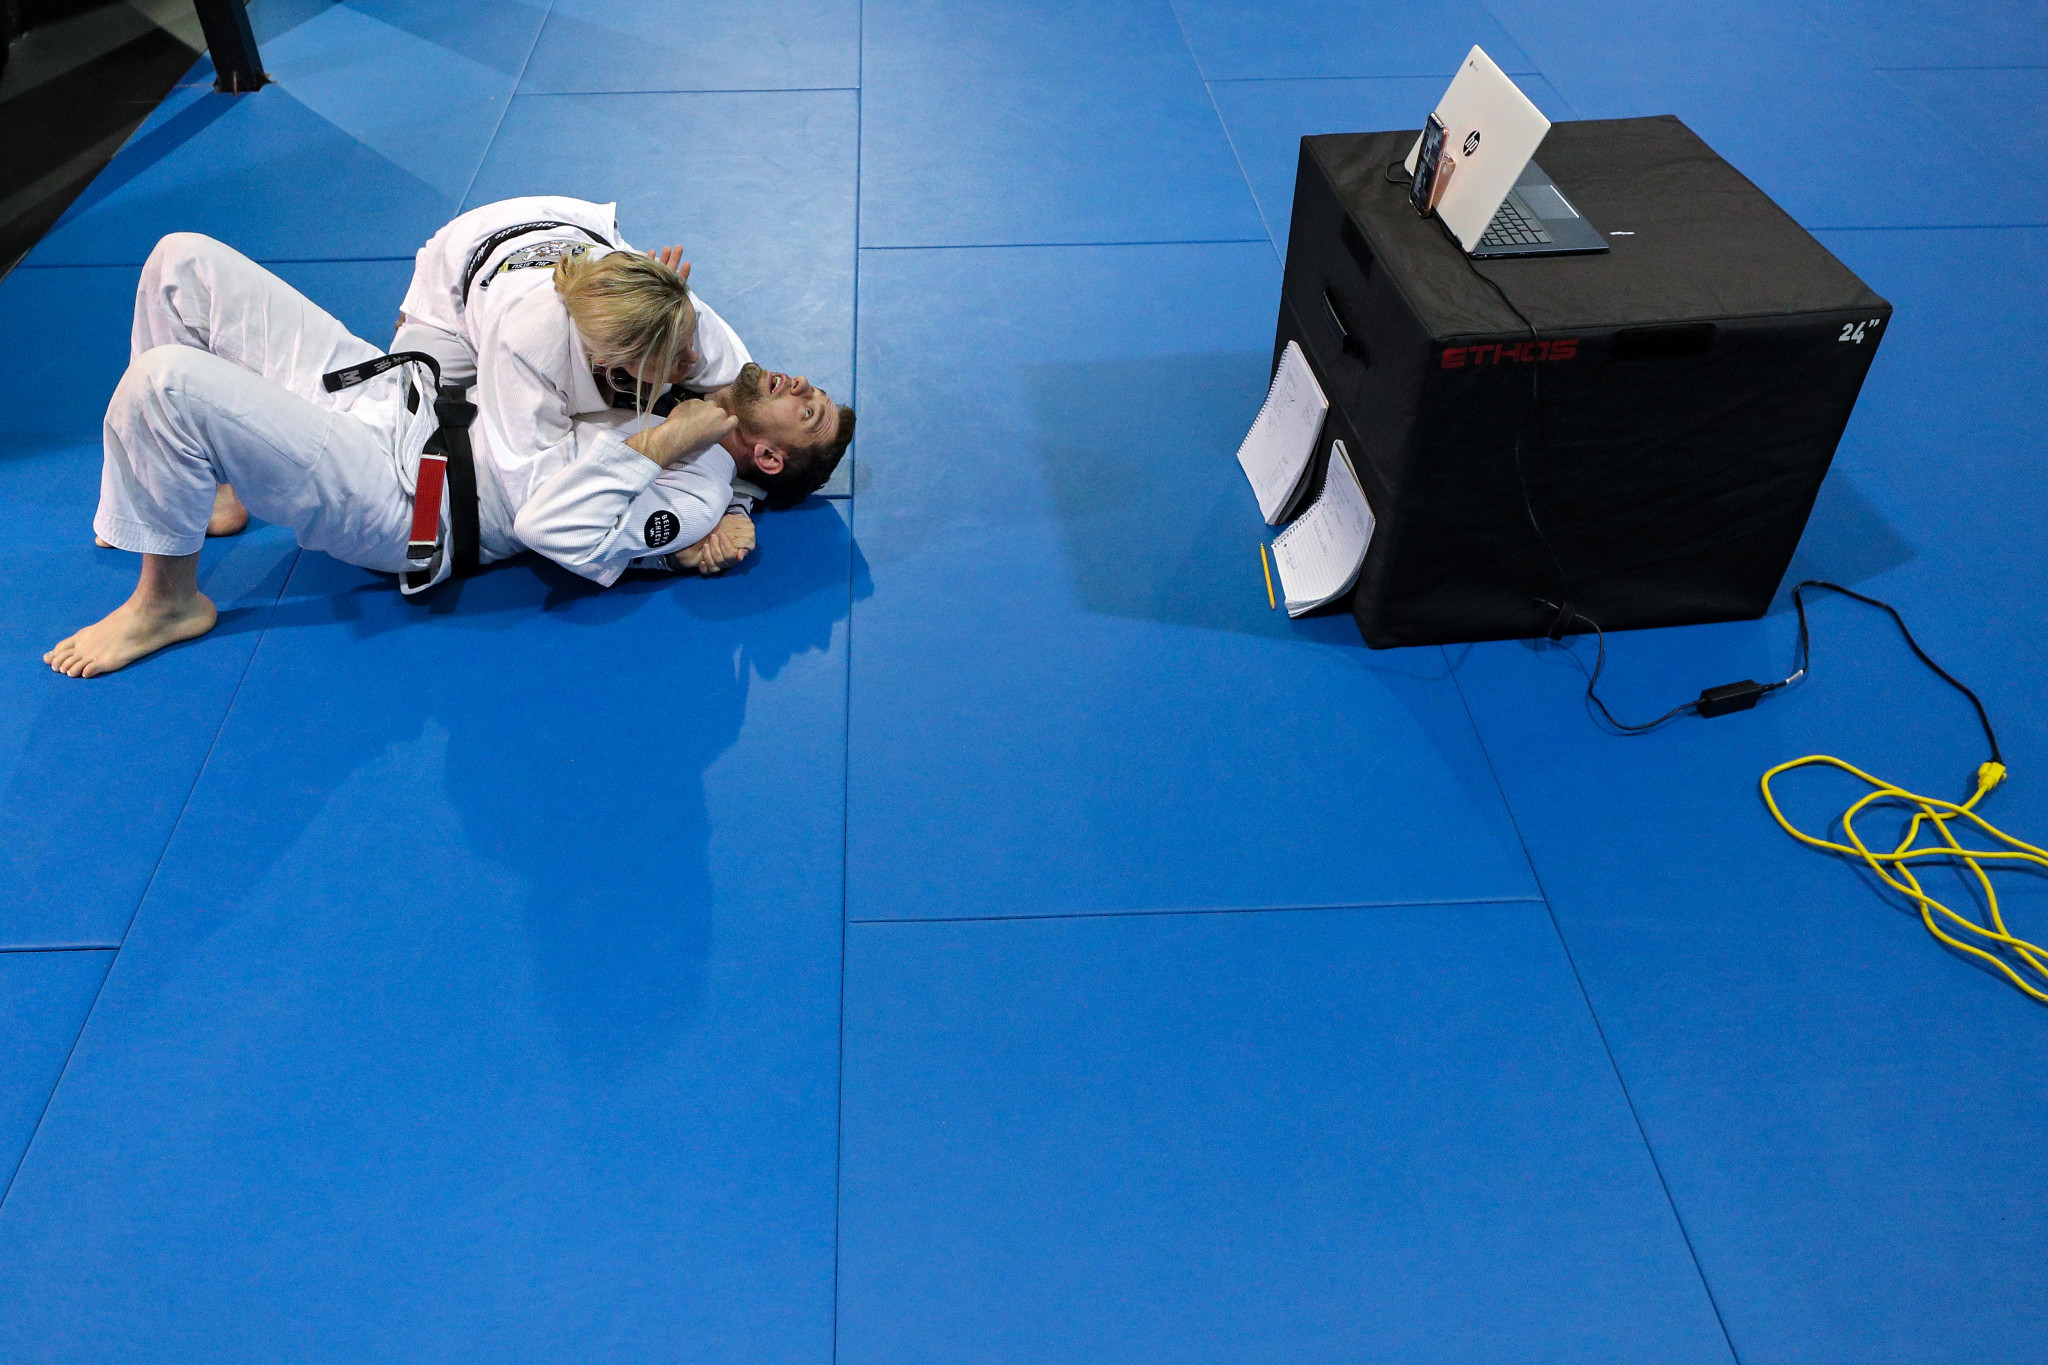 Jordanian ju-jitsu instructor says sport's values encourage "think first and be calm" attitude